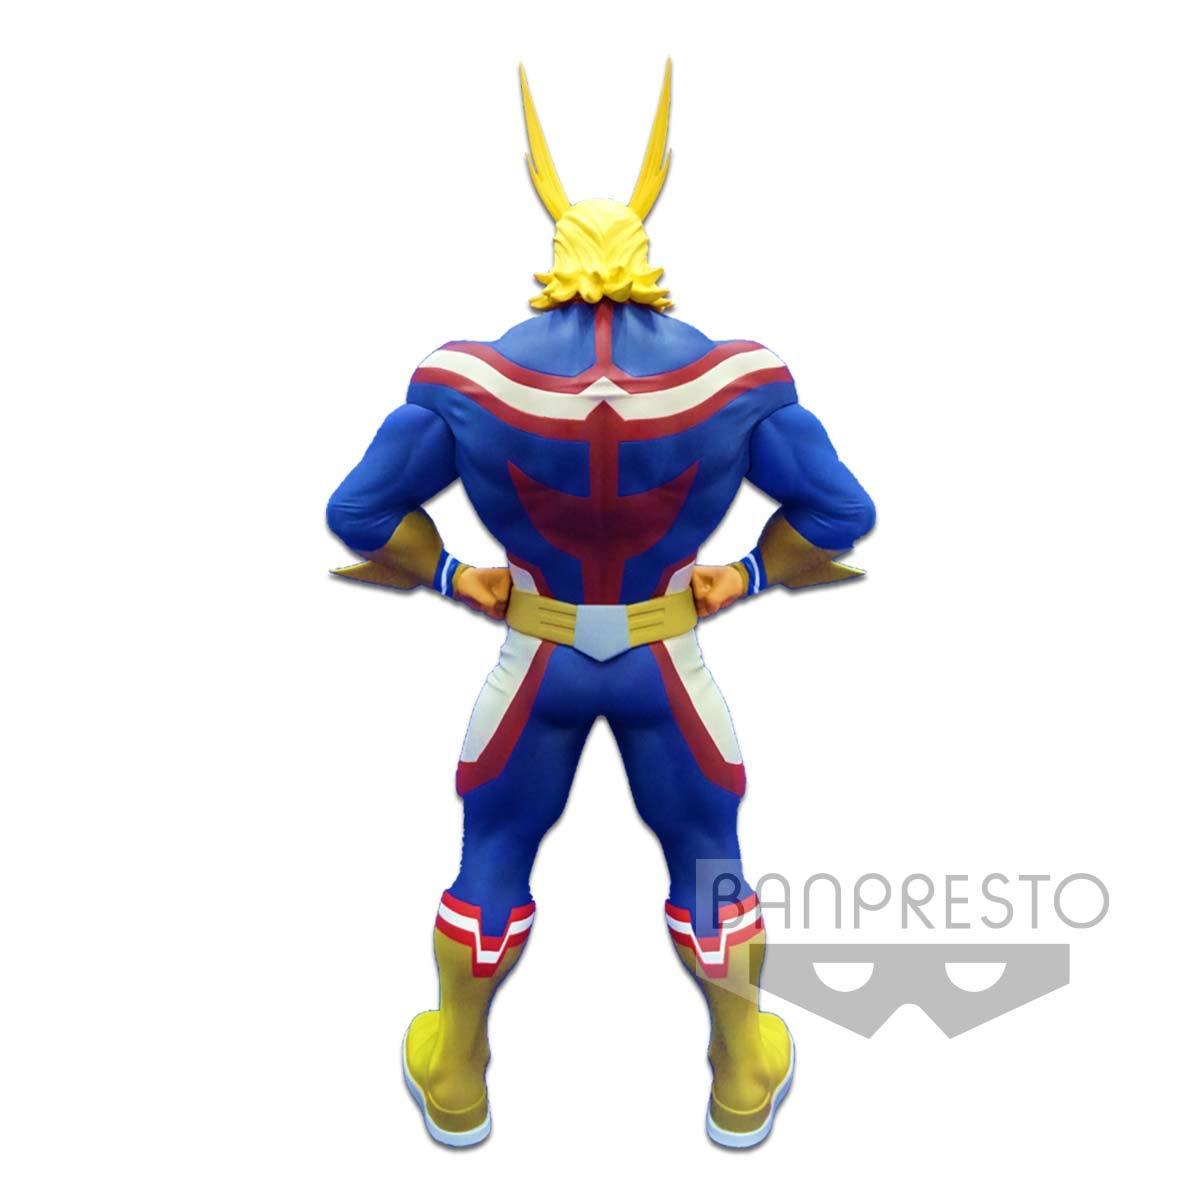 Banpresto My Hero Academia Age of Heroes All Might Figure - Super Anime Store FREE SHIPPING FAST SHIPPING USA